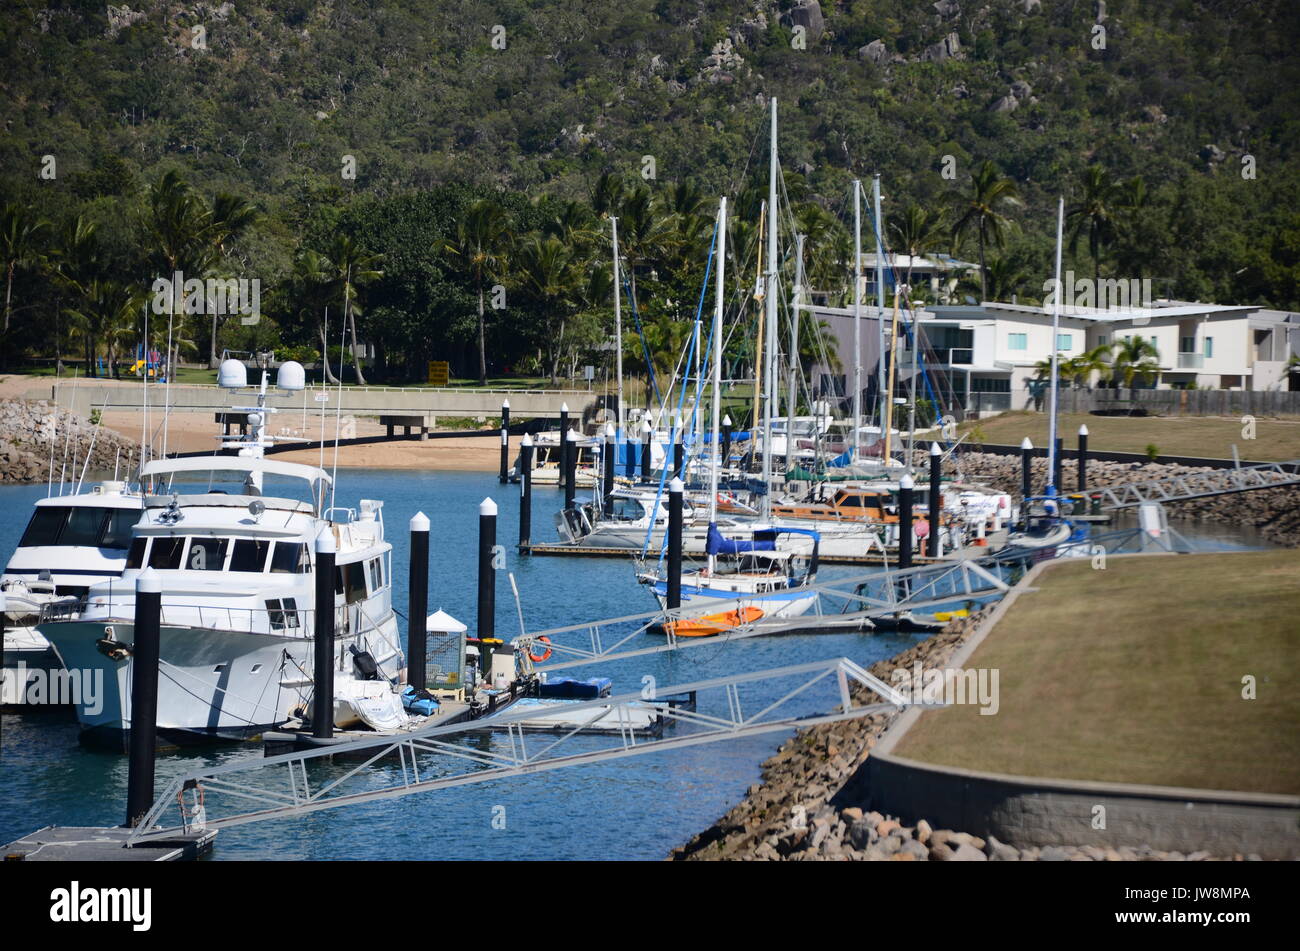 Magnetic Island Marina High Resolution Stock Photography and Images - Alamy